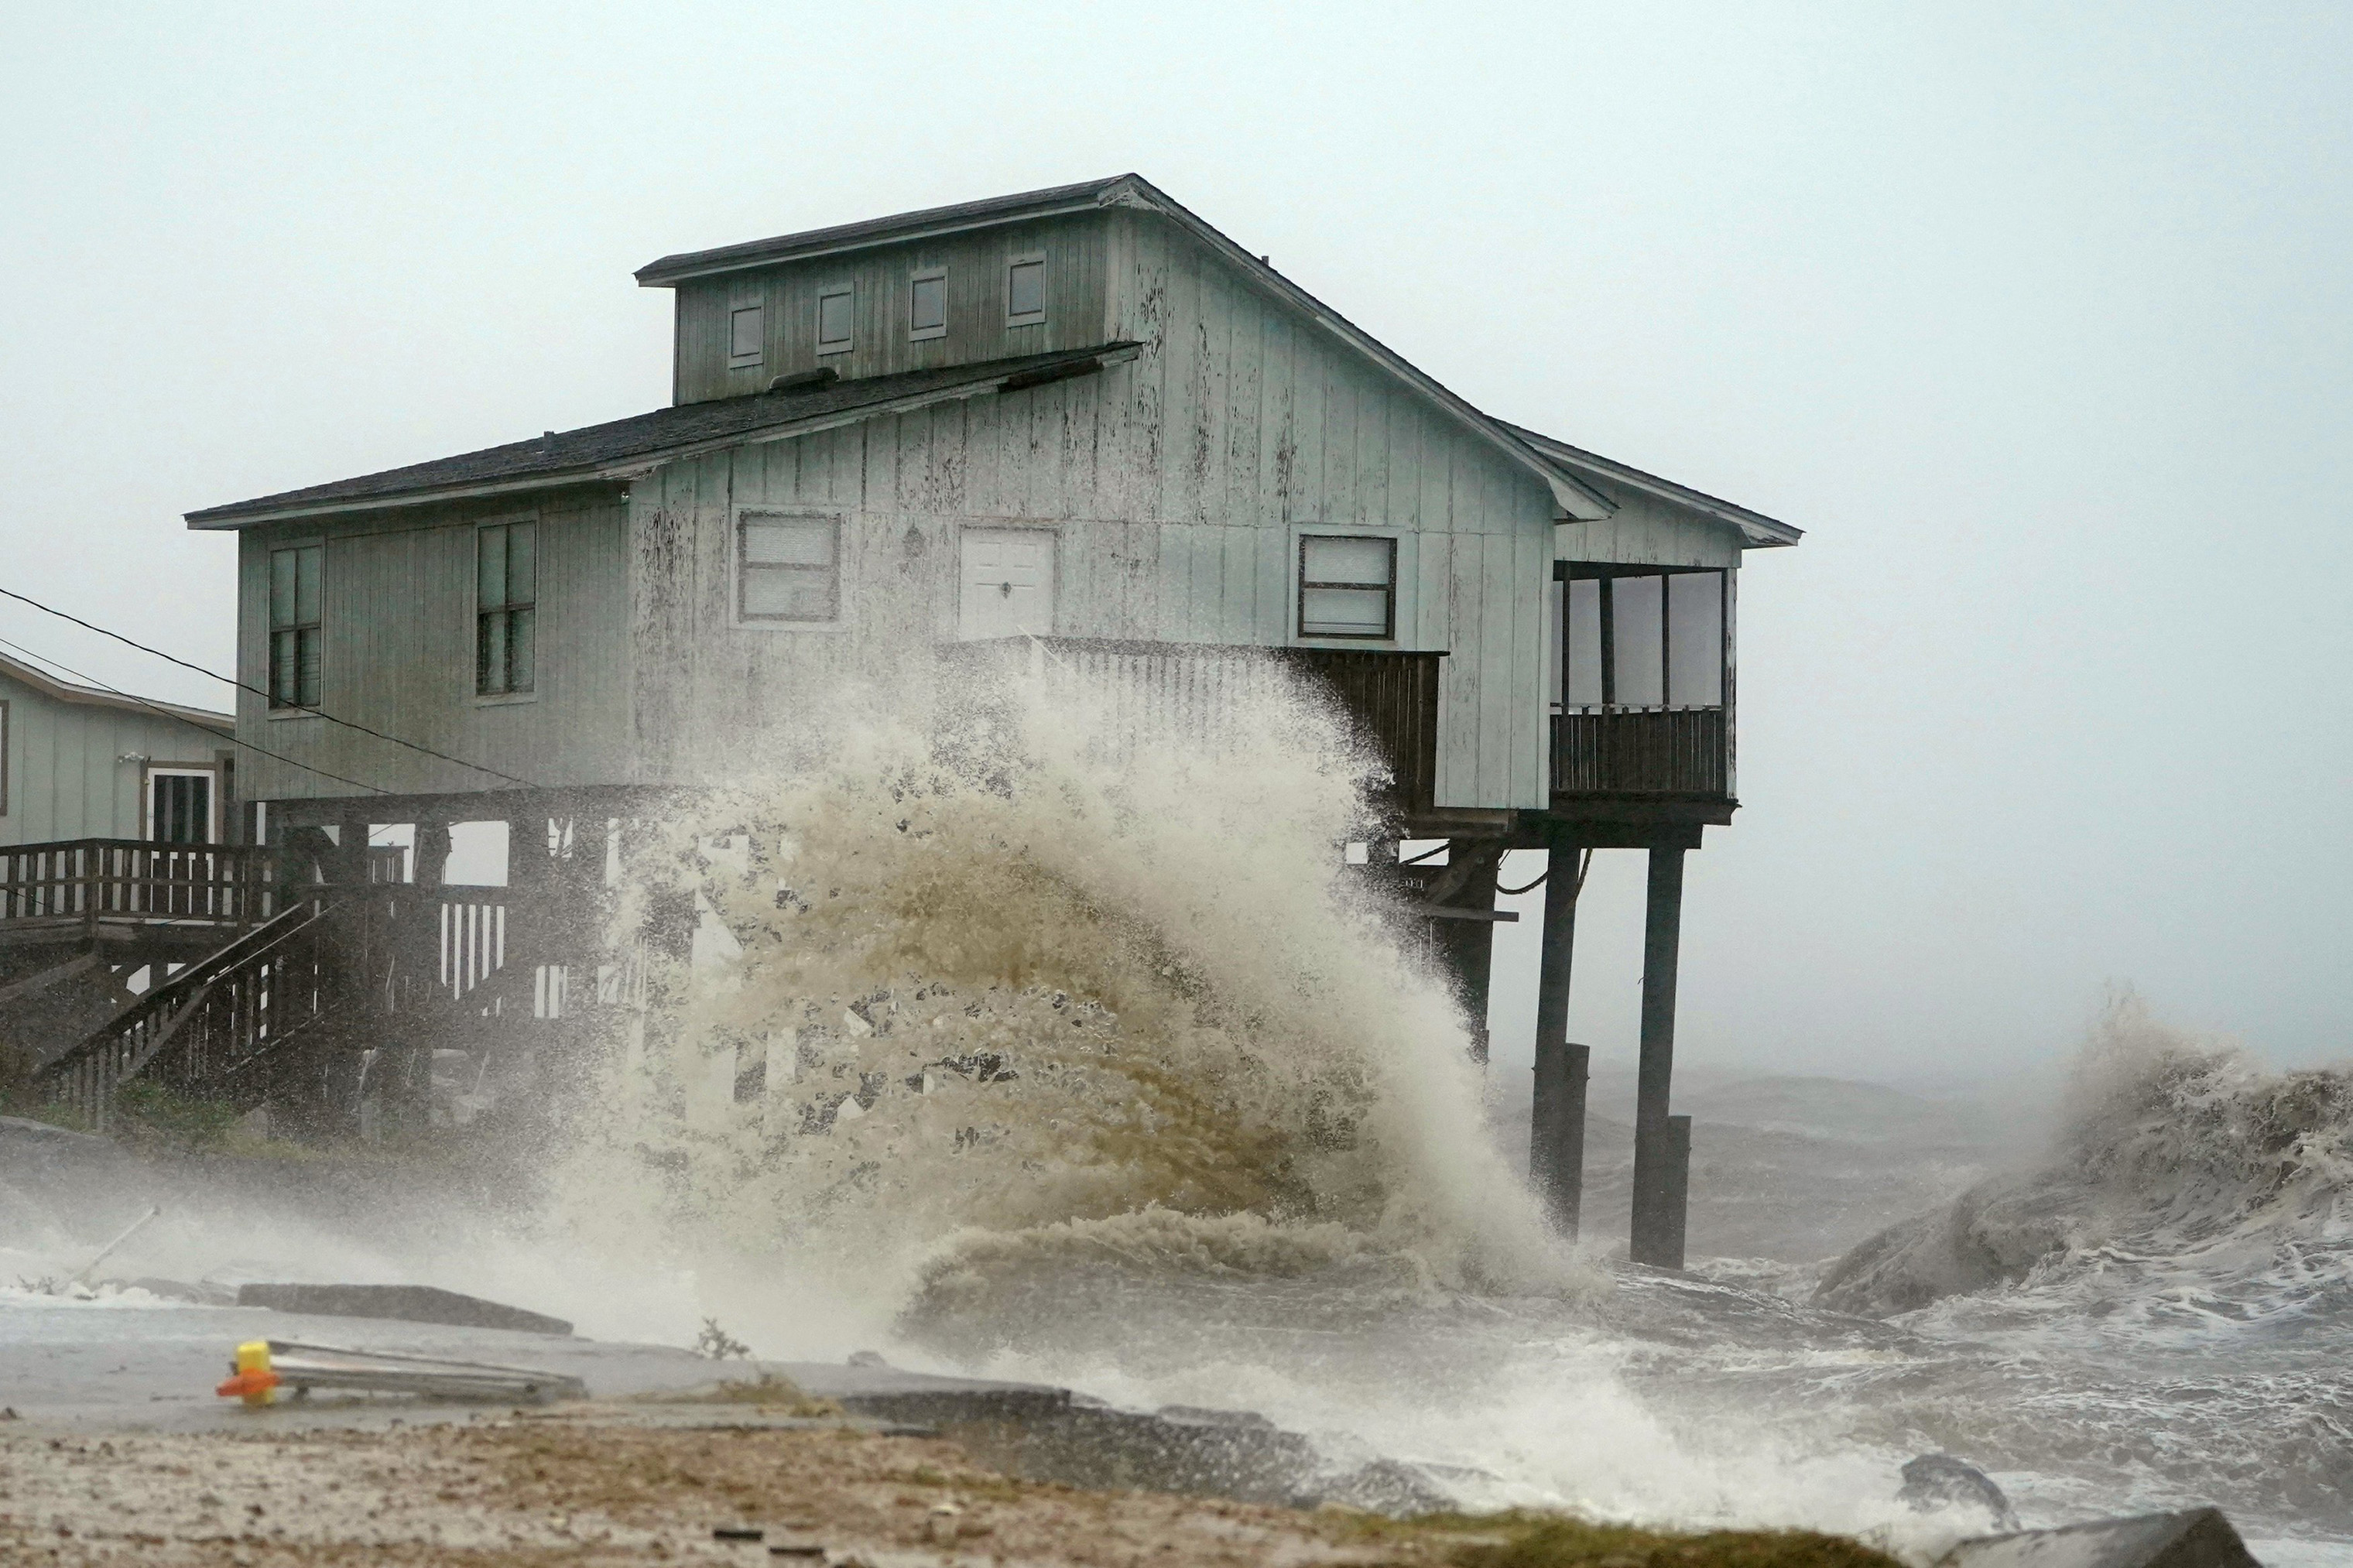 Waves take over a house as Hurricane Michael comes ashore in Alligator Point, Fla., Oct. 10, 2018. (Carlo Allegri—Reuters)